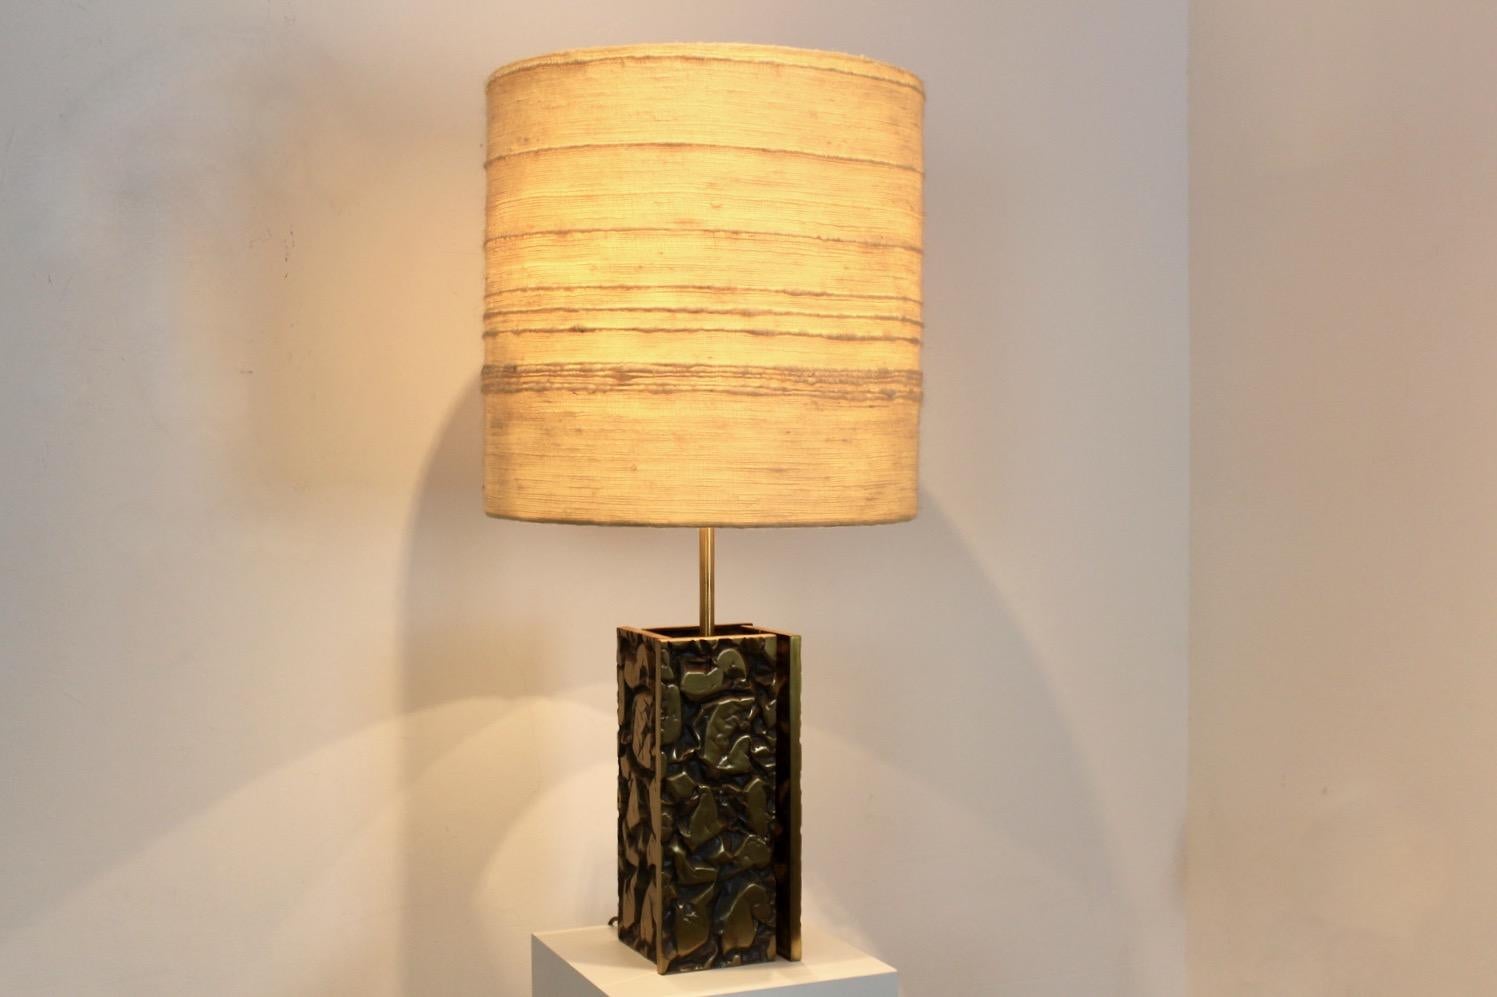 French Brutalist Metal Sculptured Table Lamp with Raw Woolen Structured Shade